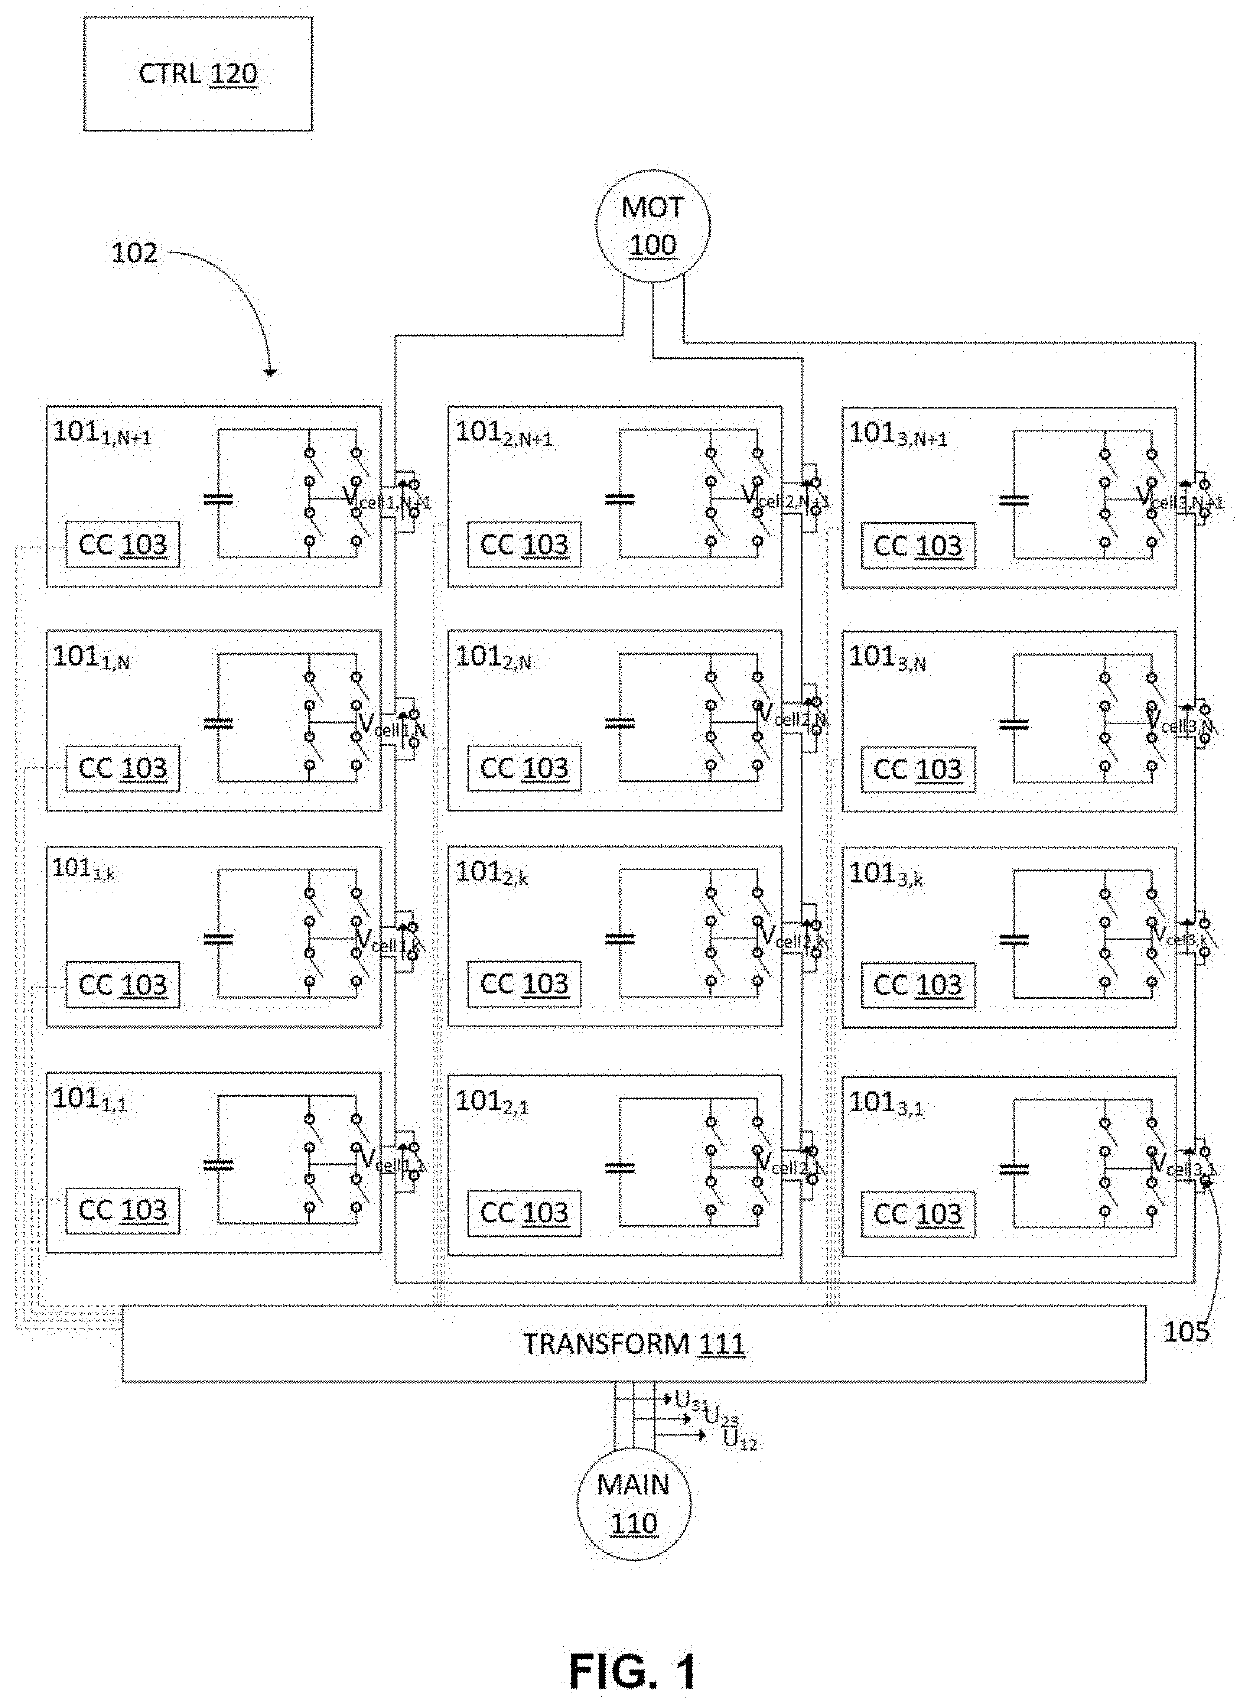 Management of the number of active power cells of a variable speed drive